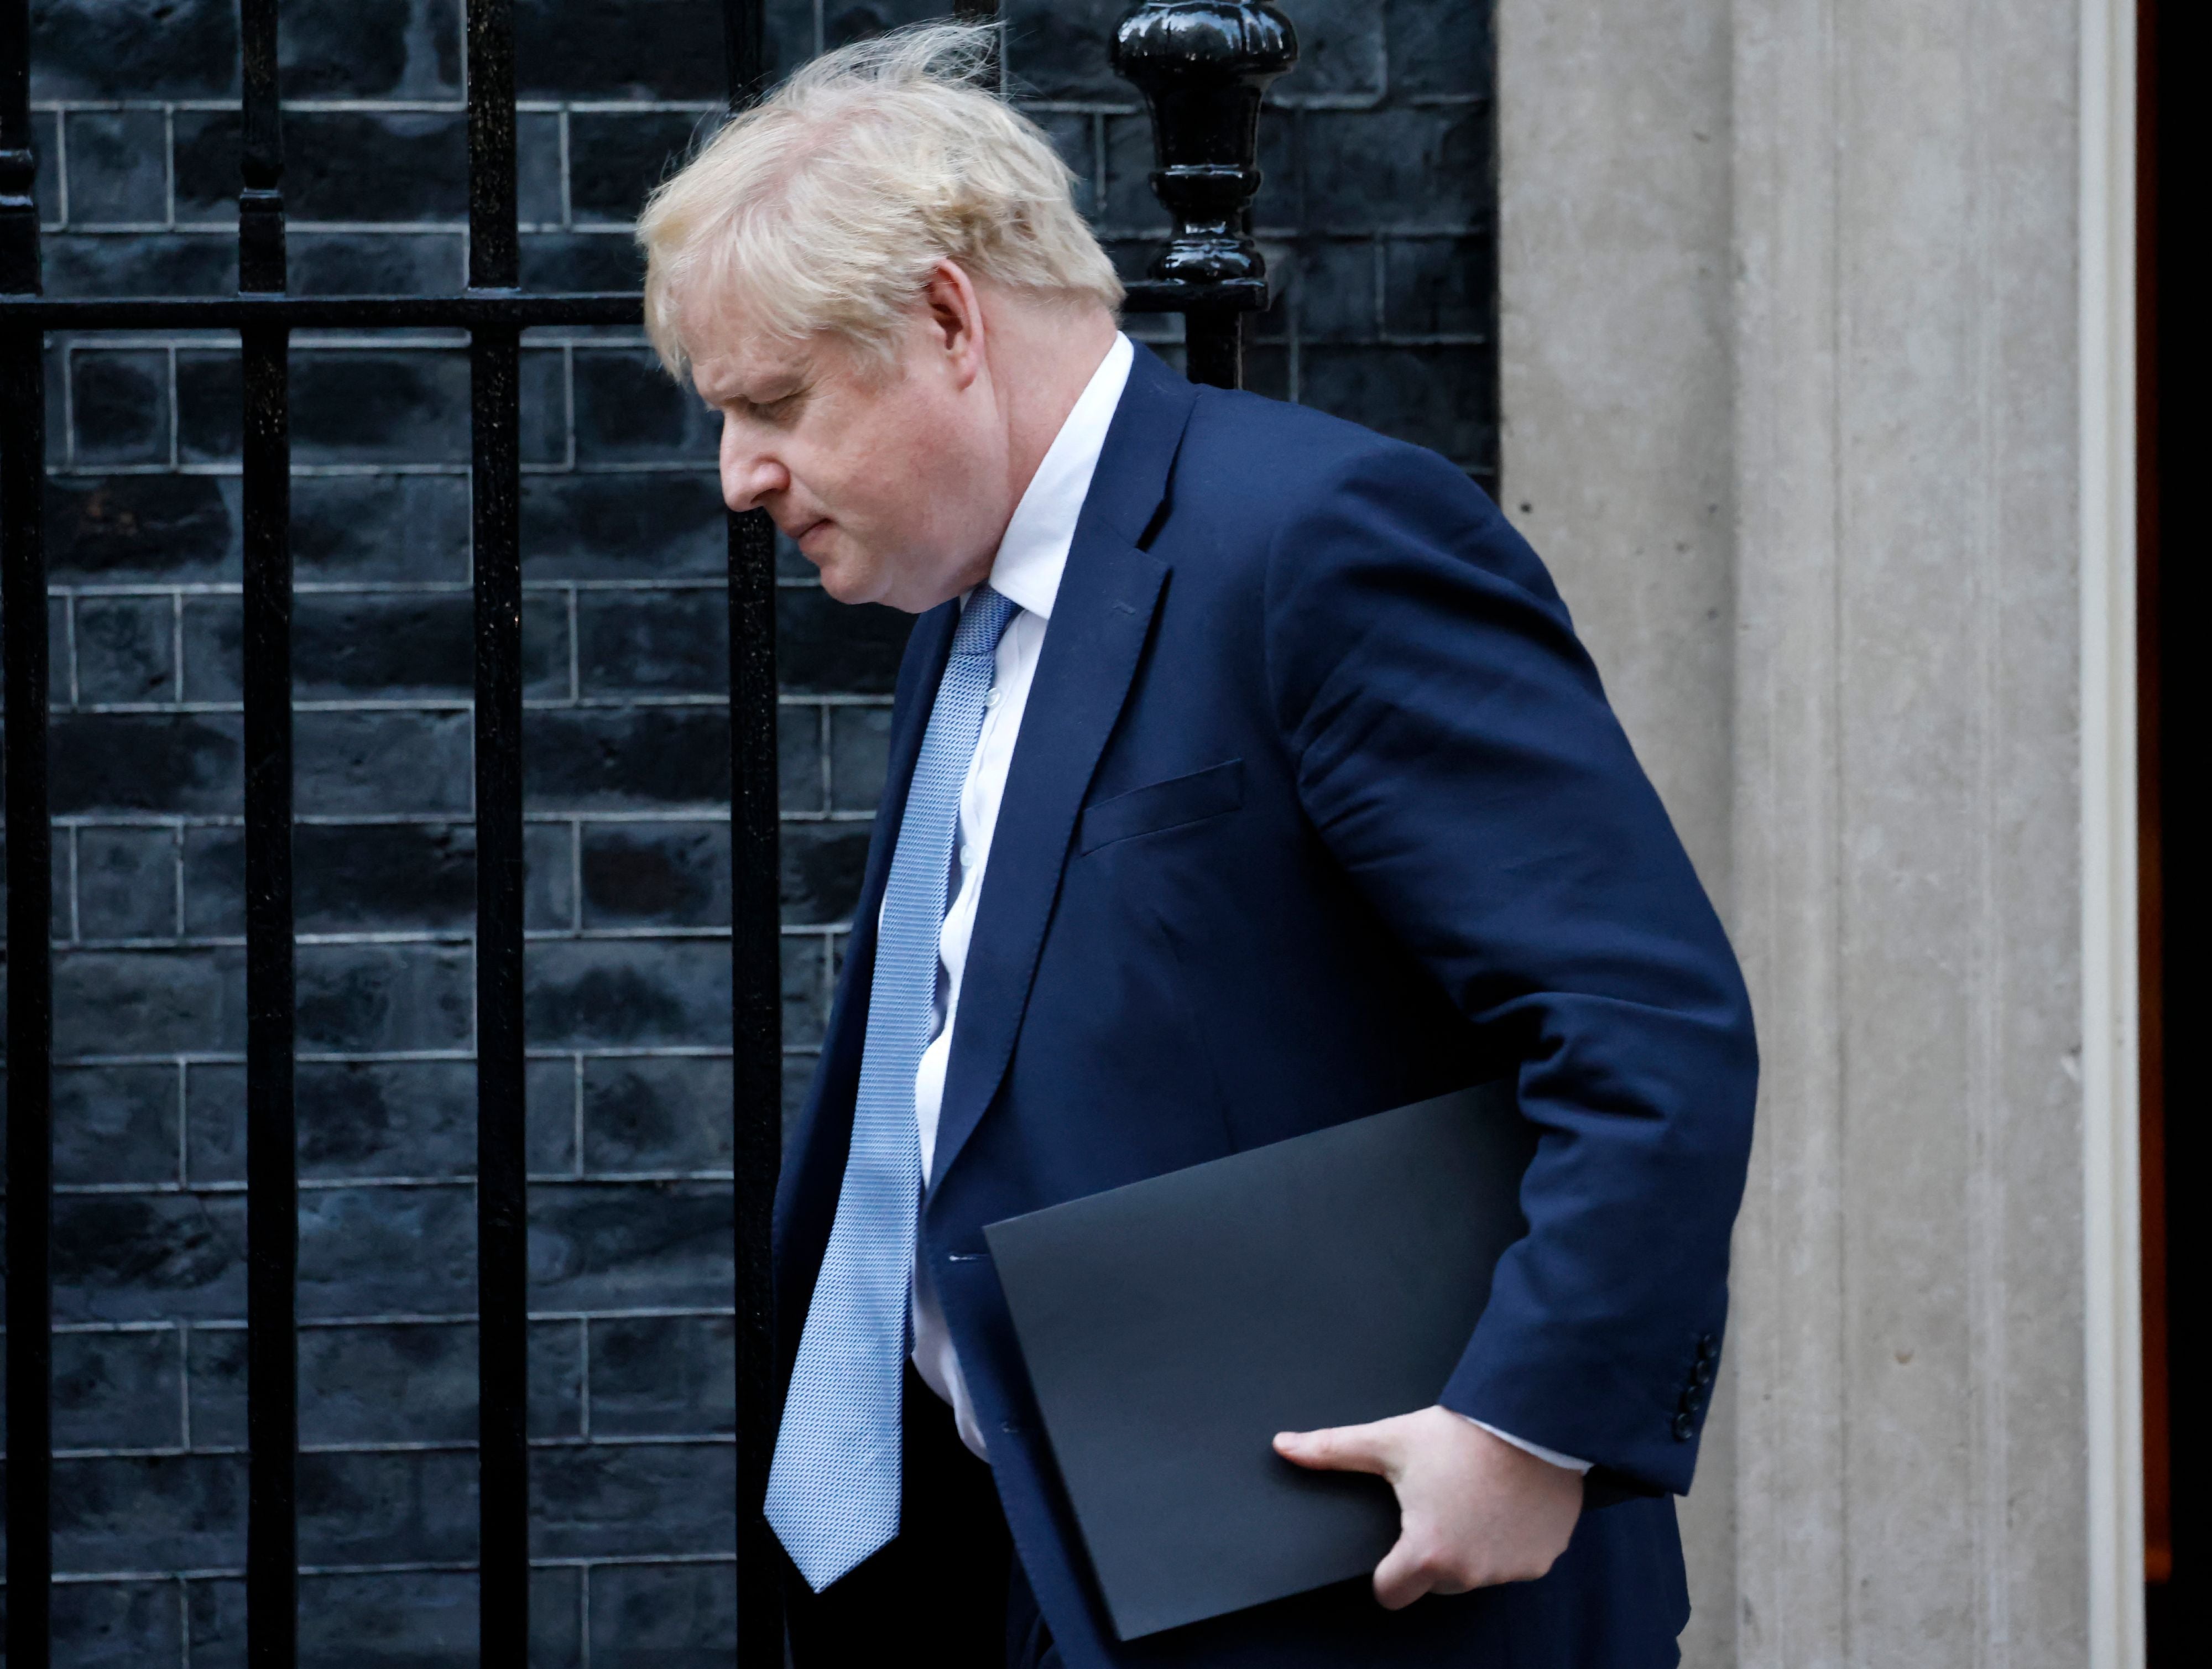 Johnson’s standards are again under intense questioning